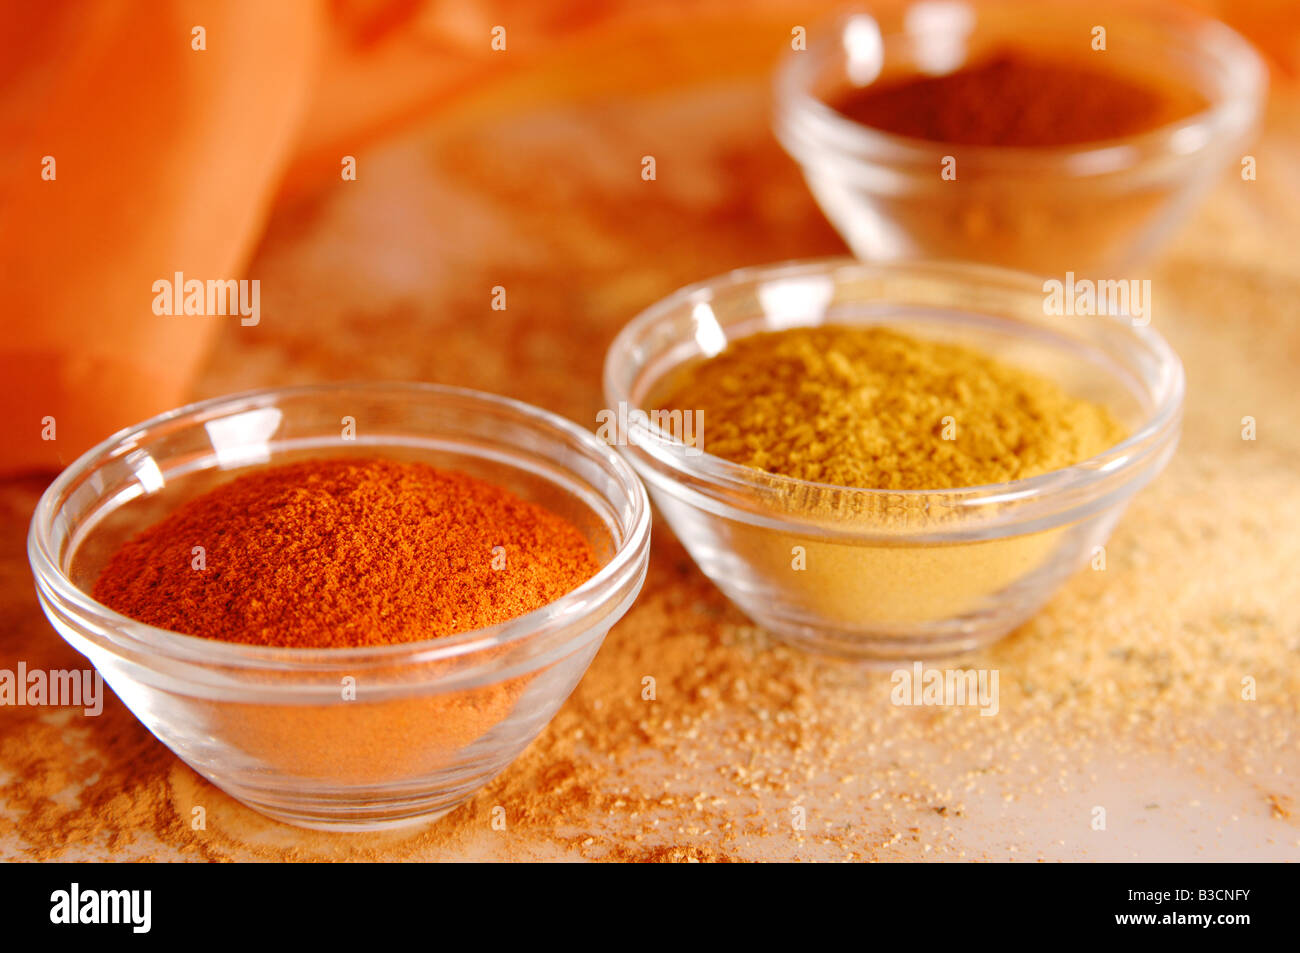 Variety of spices, close up Stock Photo